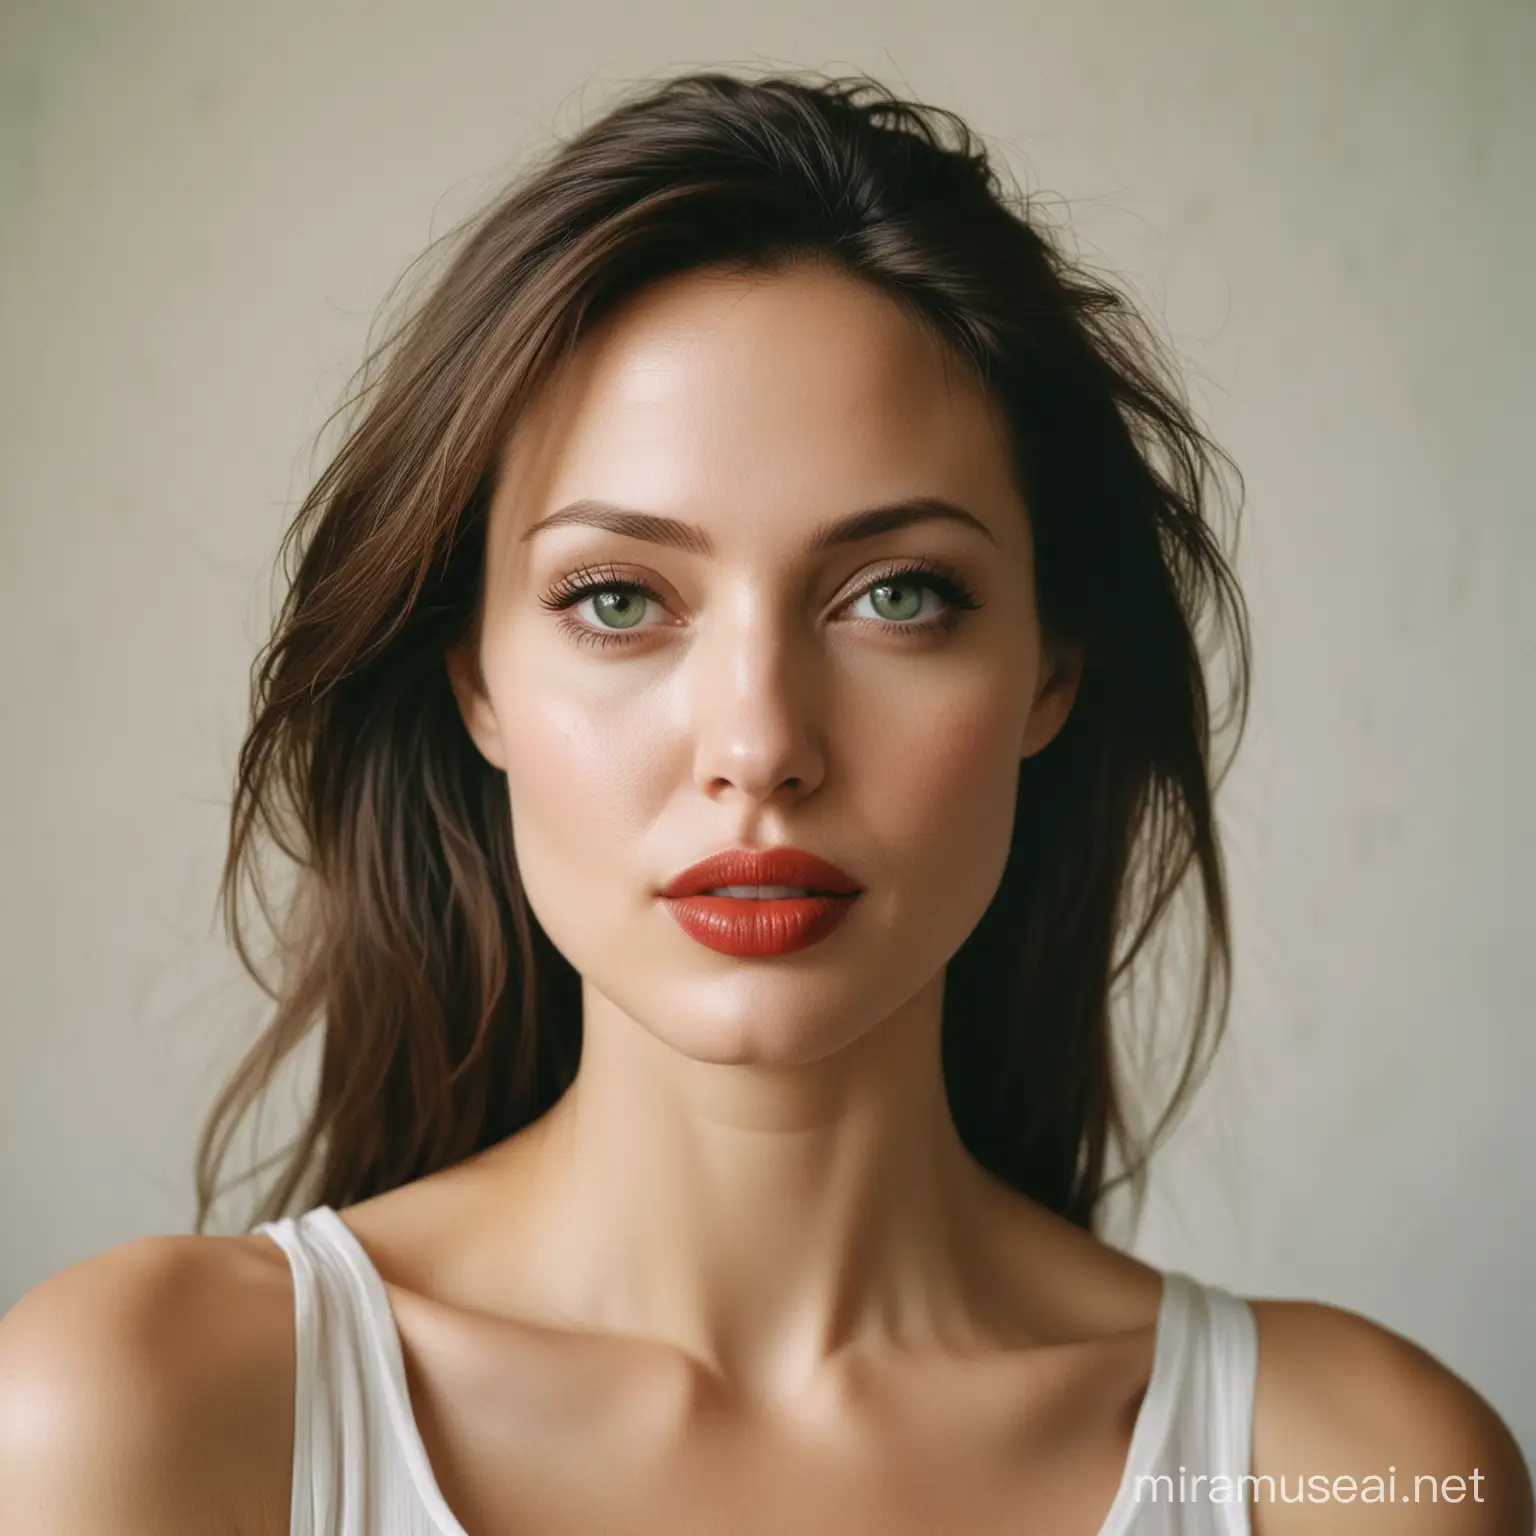 film photography, light fabric, using a 35mm lens, f/2, film, grain, beautiful young angelina jolie, portrait, malena, realistic natural skin, realistic  natural hair, green eyes, red lips